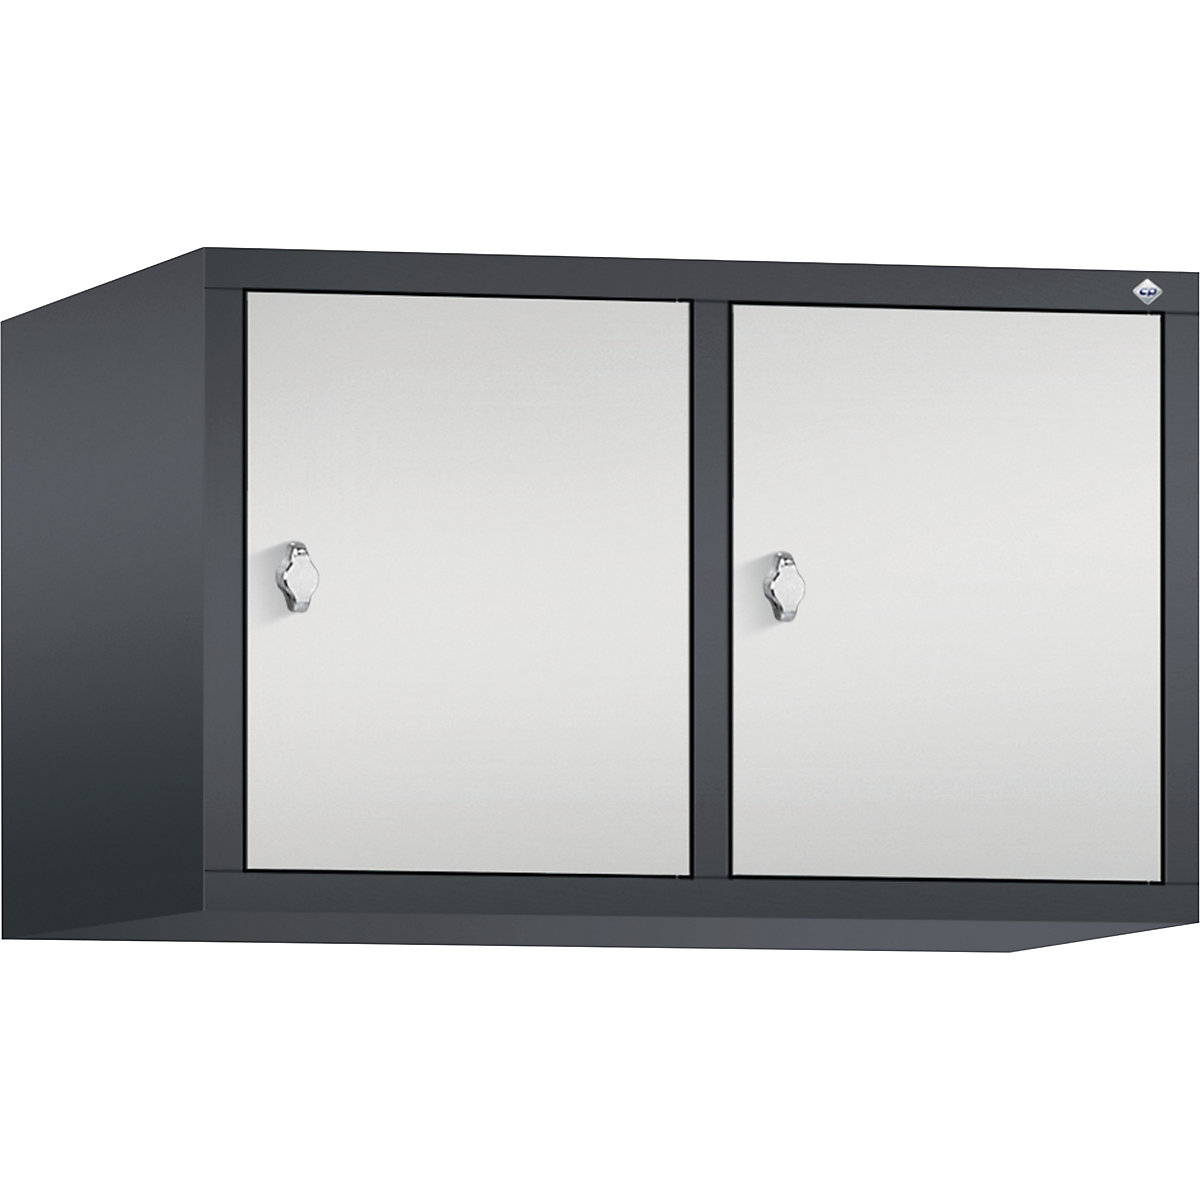 CLASSIC add-on cupboard – C+P, 2 compartments, compartment width 400 mm, black grey / light grey-5